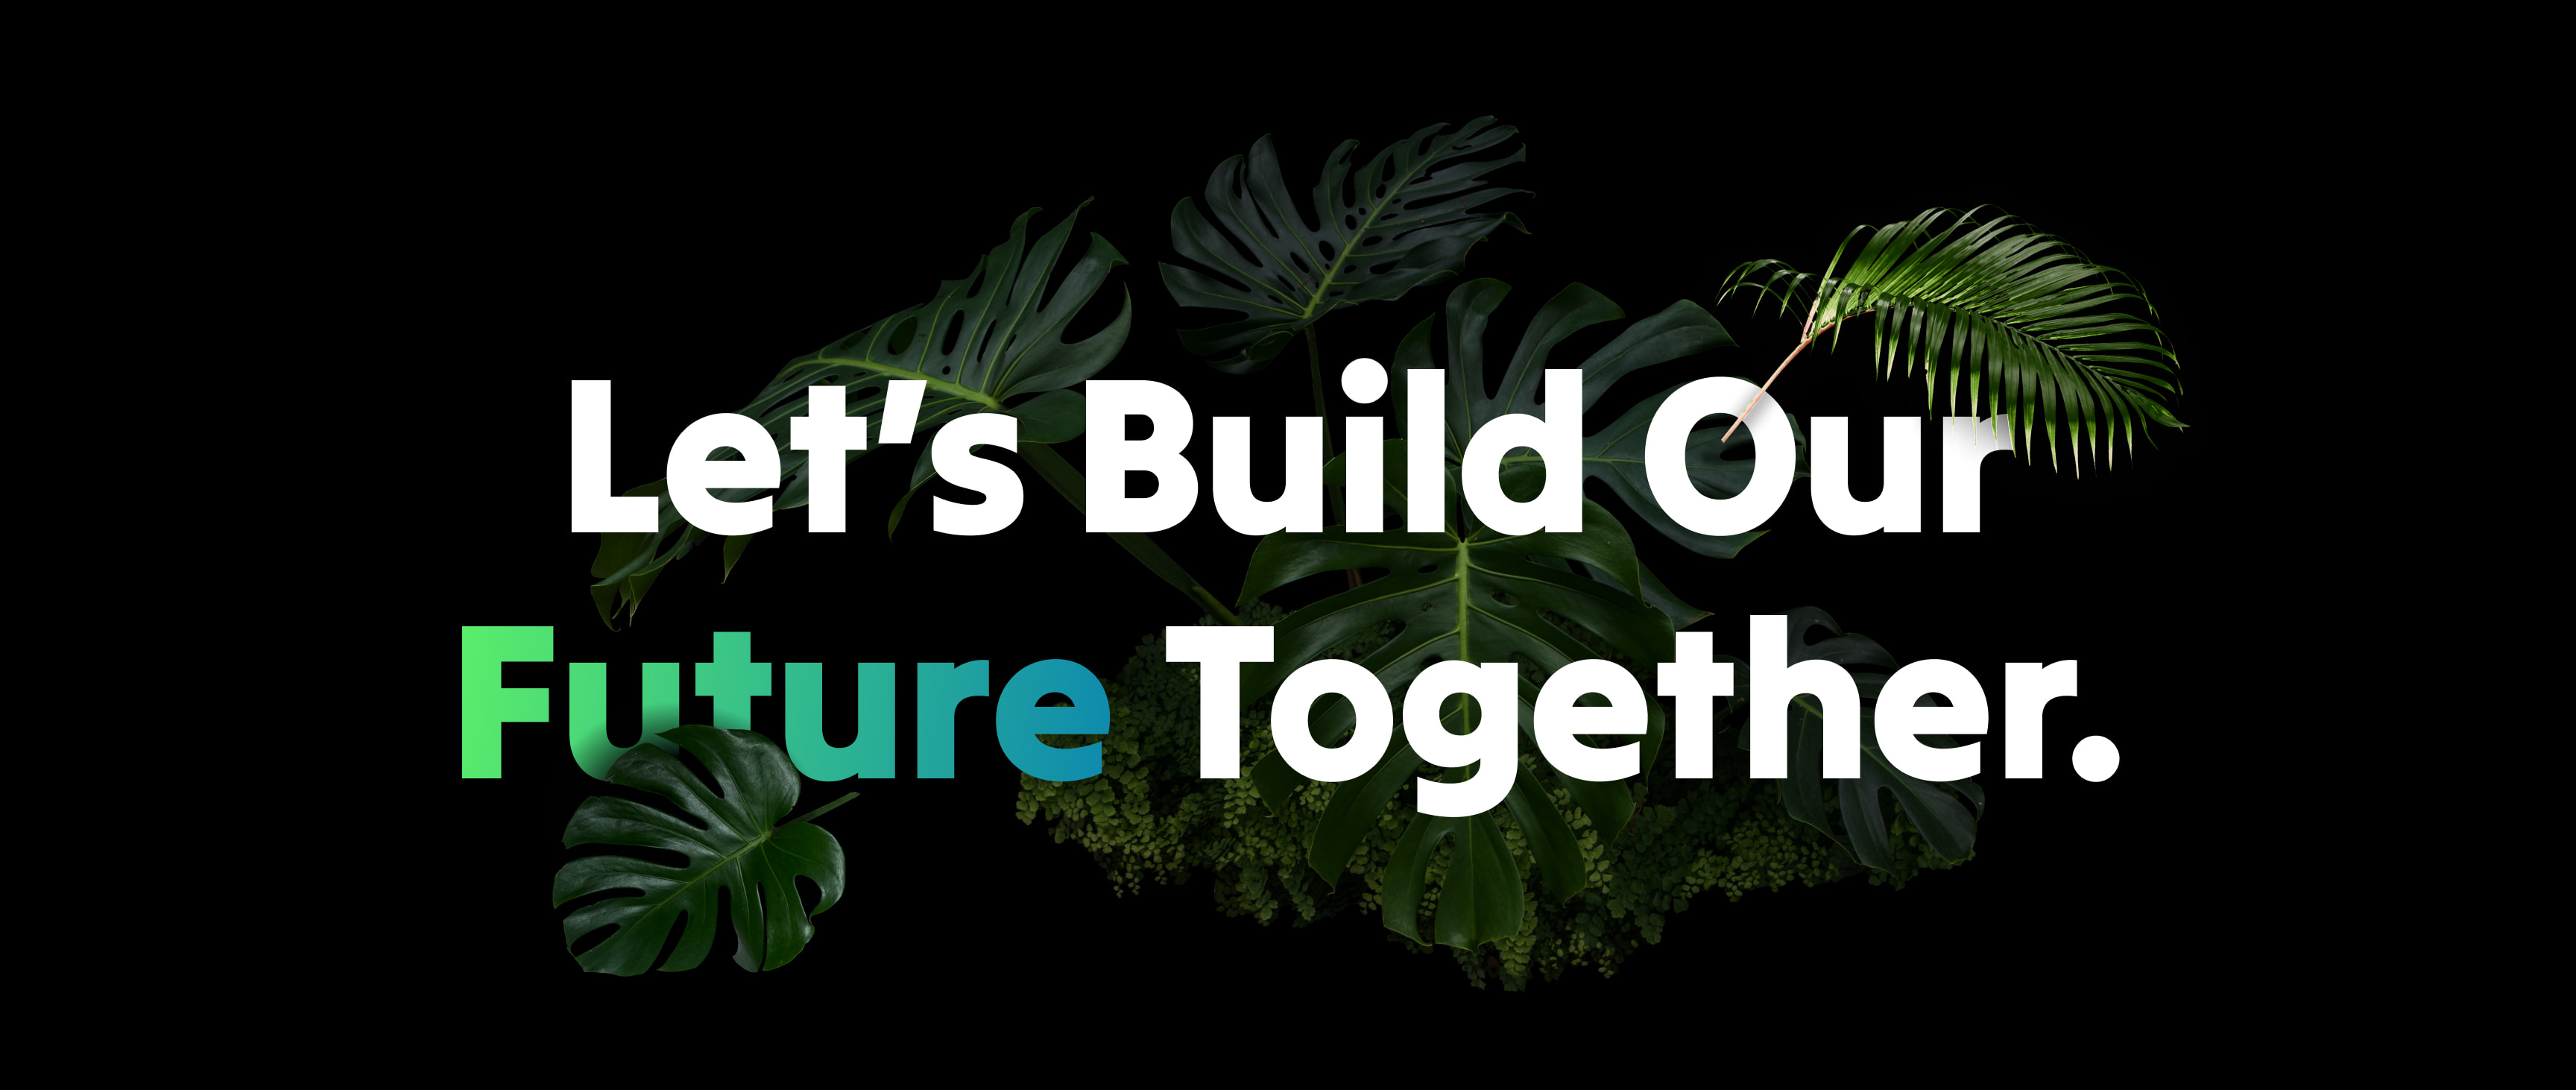 let’s build our future together.